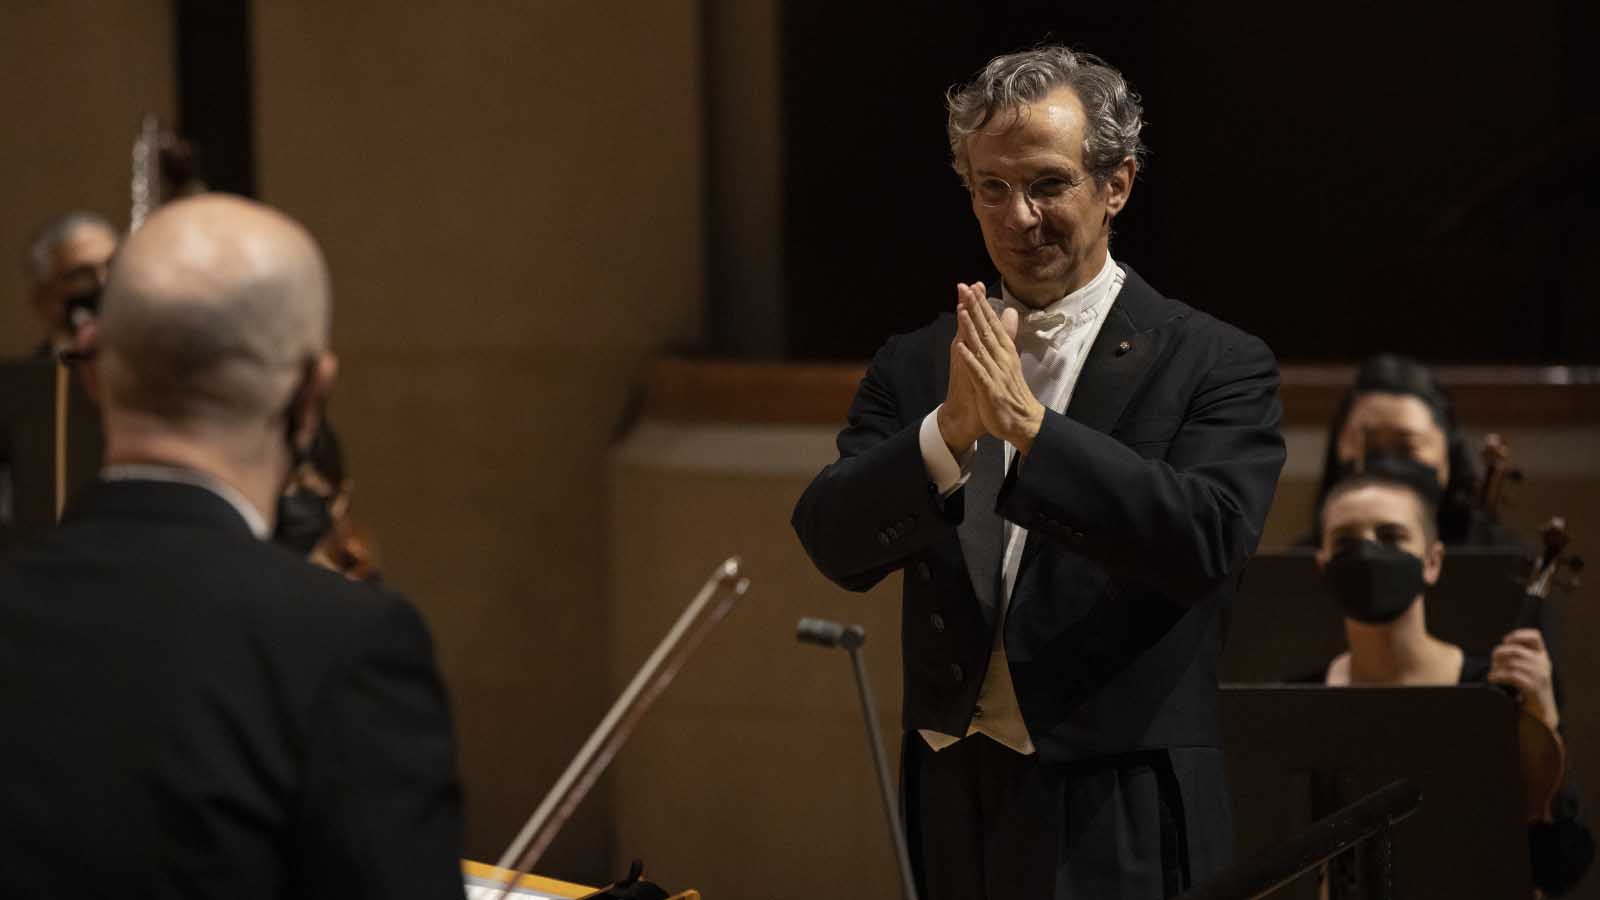 Chamber Concert with Fabio Luisi